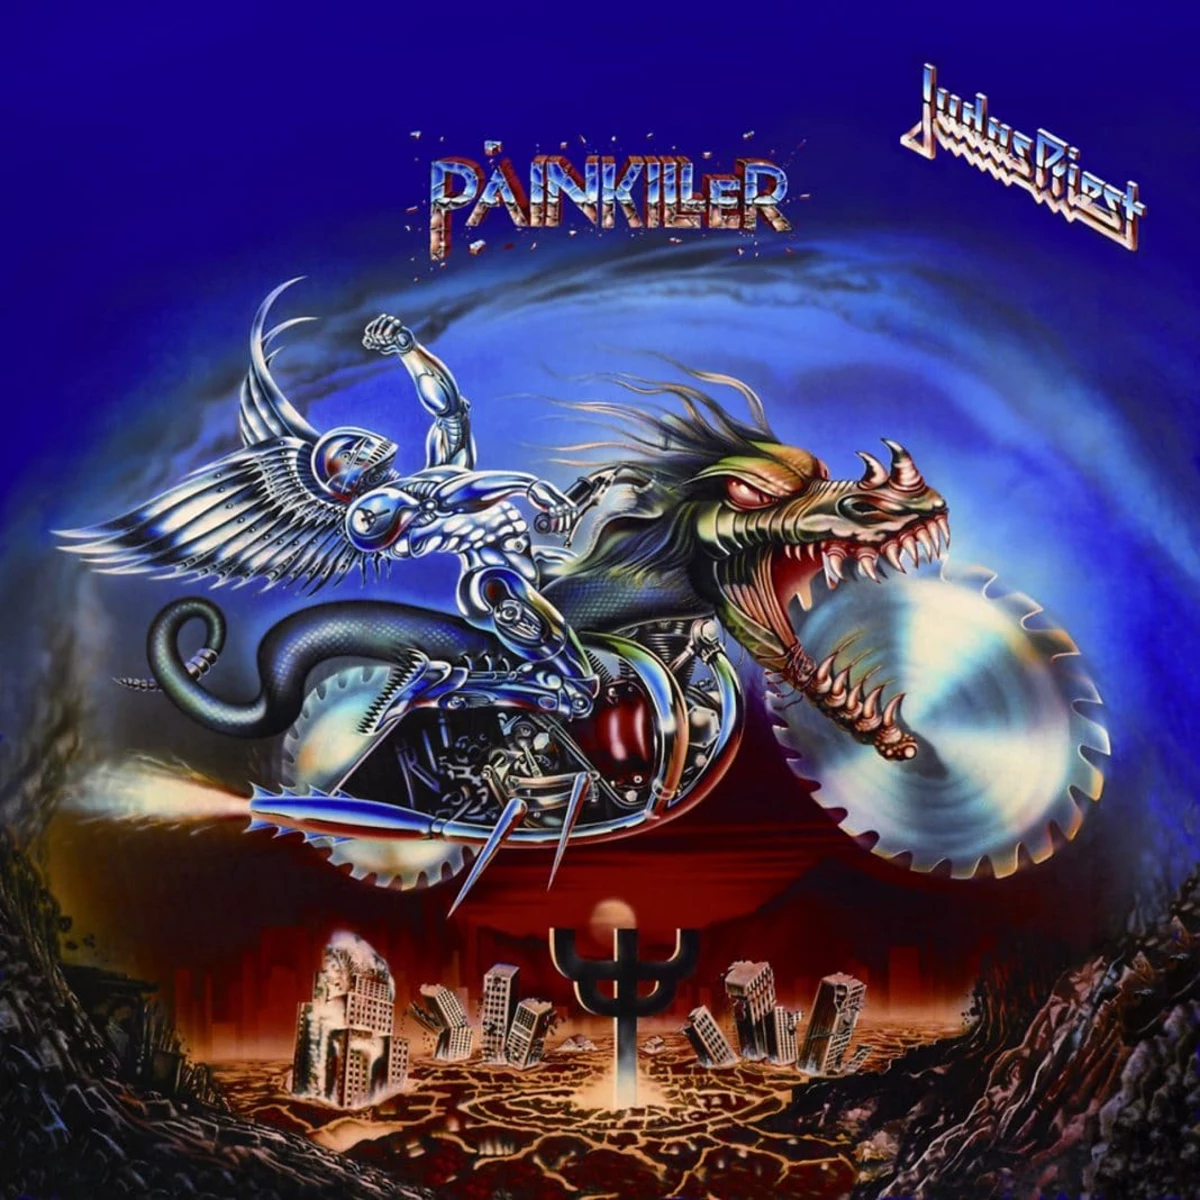 Can't Stop the “Painkiller”: Judas Priest's Classic Album Dominates Metal  Thirty Years Later